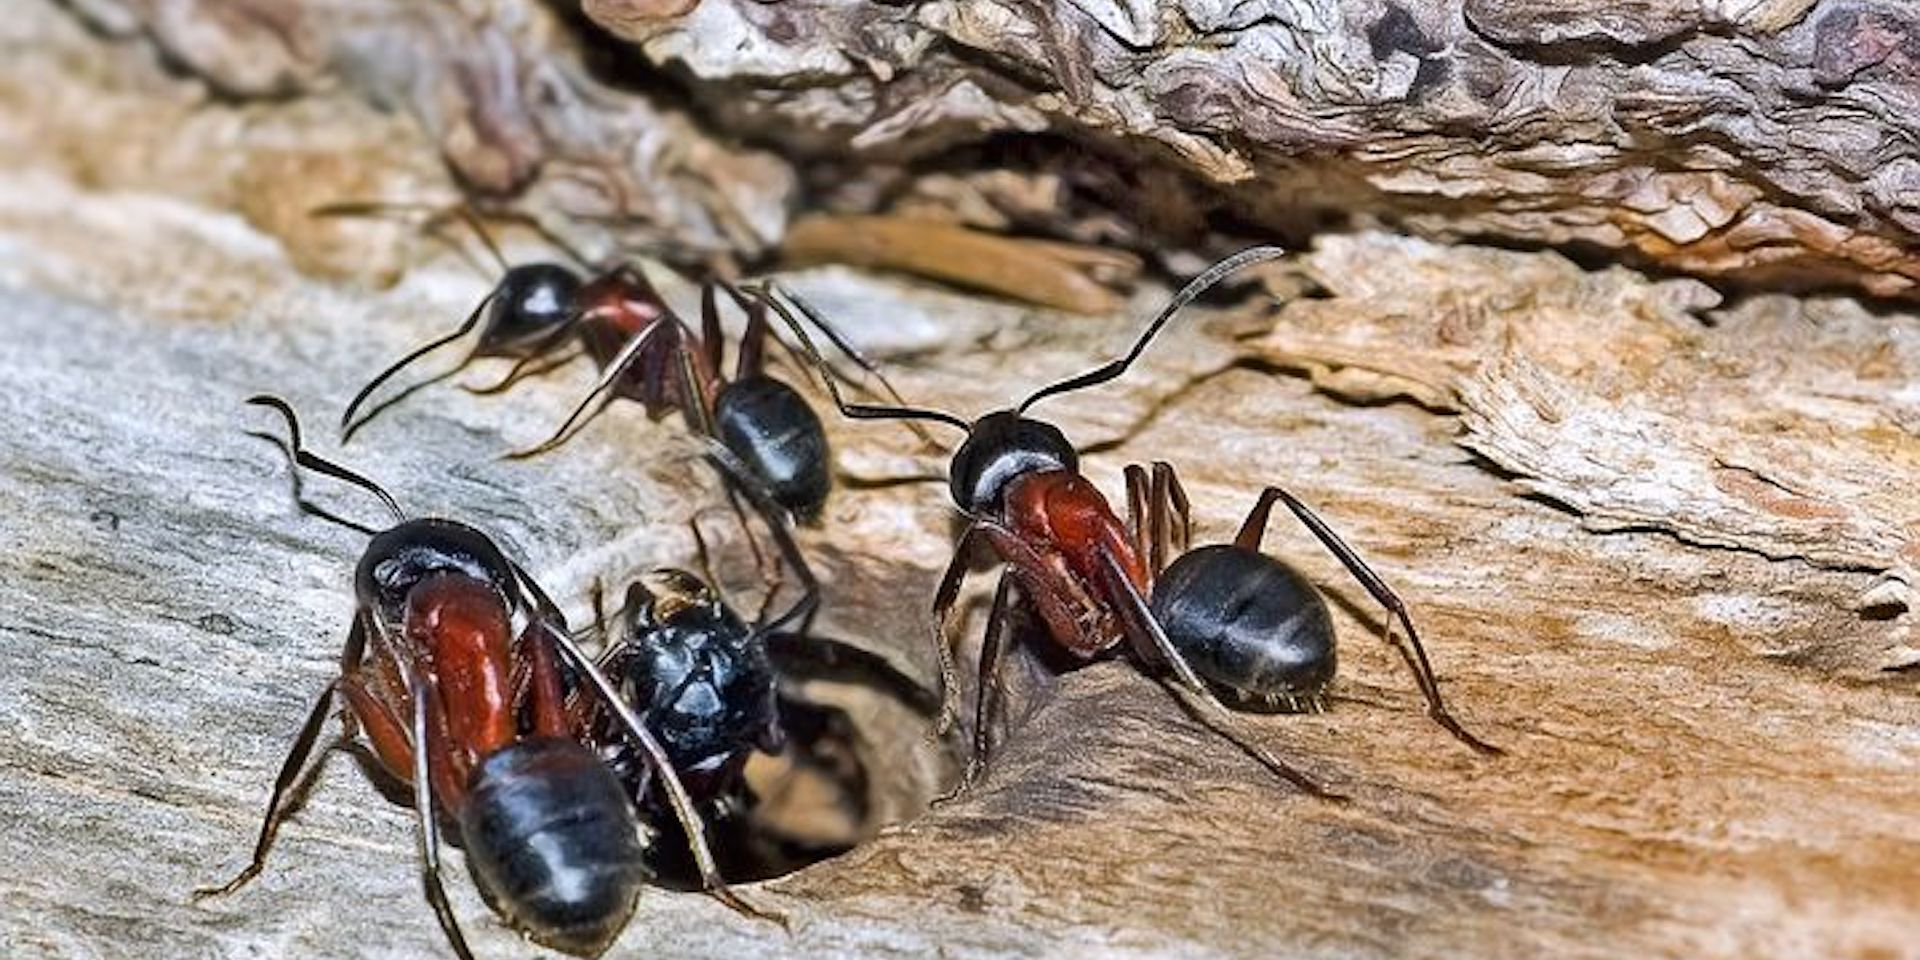 Carpenter ants are a troublesome pest